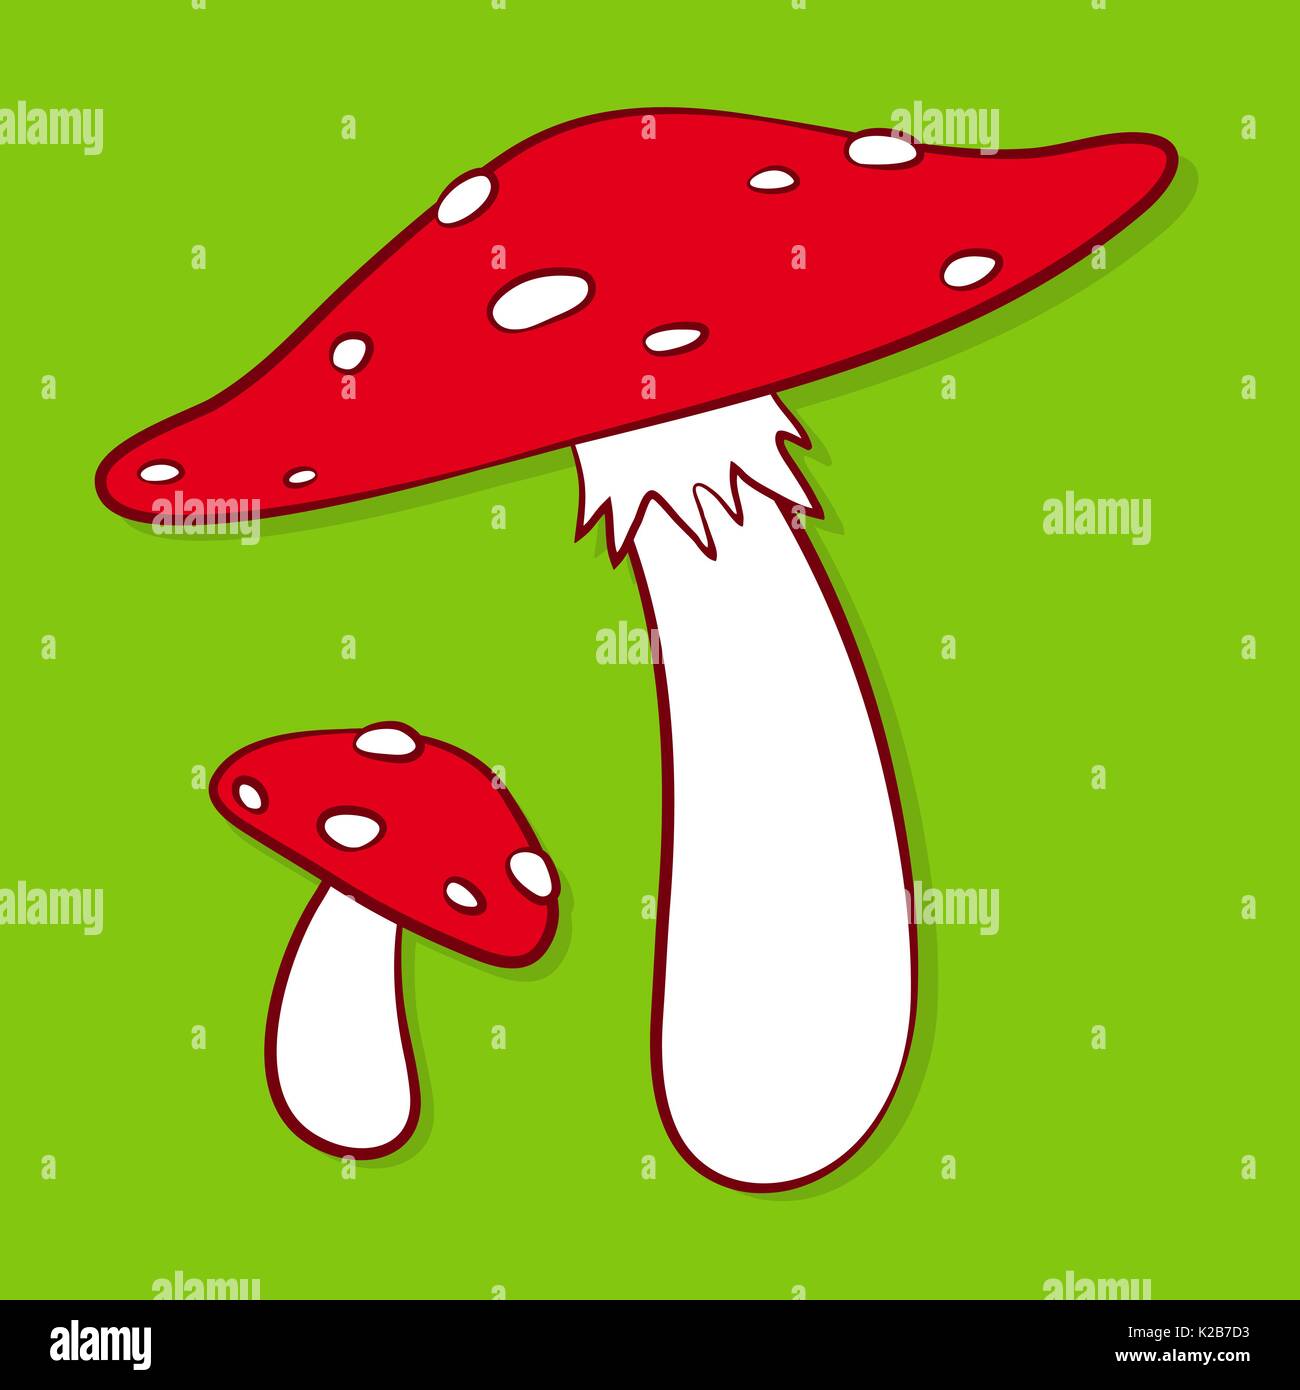 Cartoon illustration of colourful red spotted fly agaric mushrooms on a green background - illustration Stock Vector